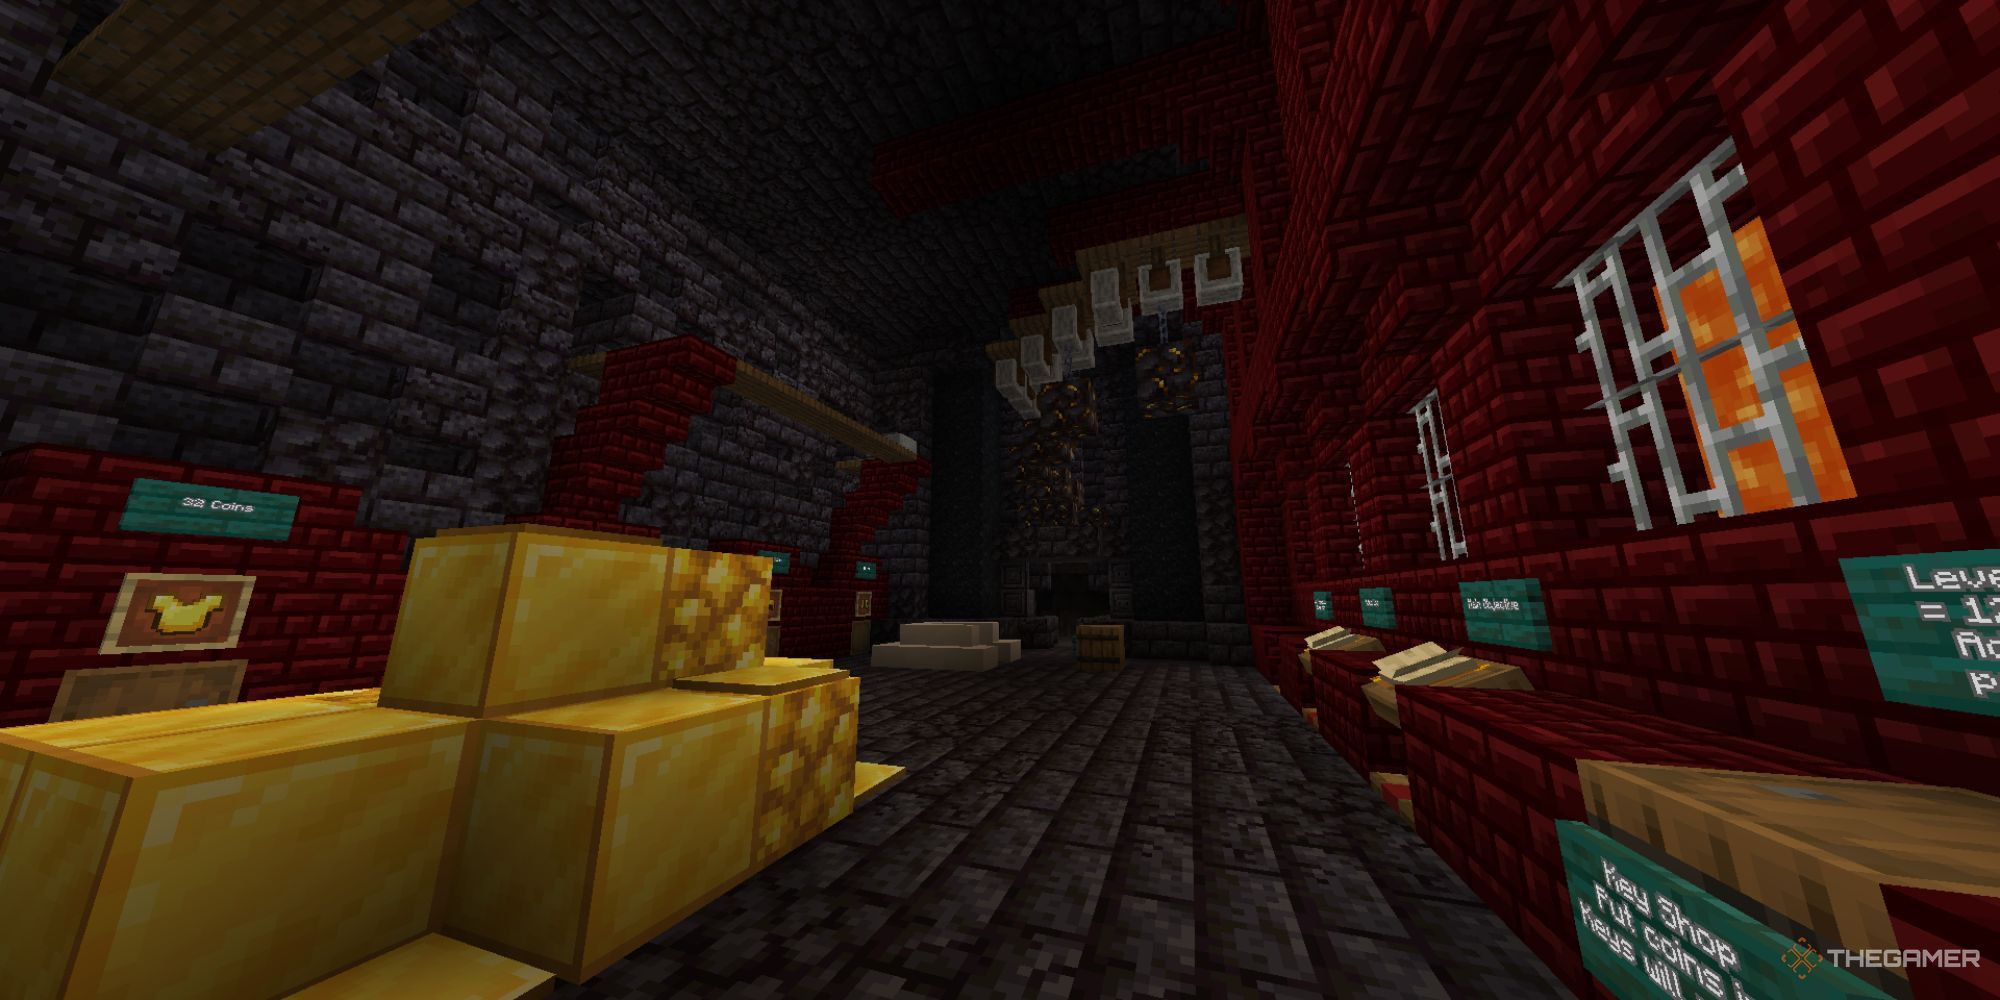 A safe area with gold blocks, lava, red and black brick blocks, books to read, and items to purchase.